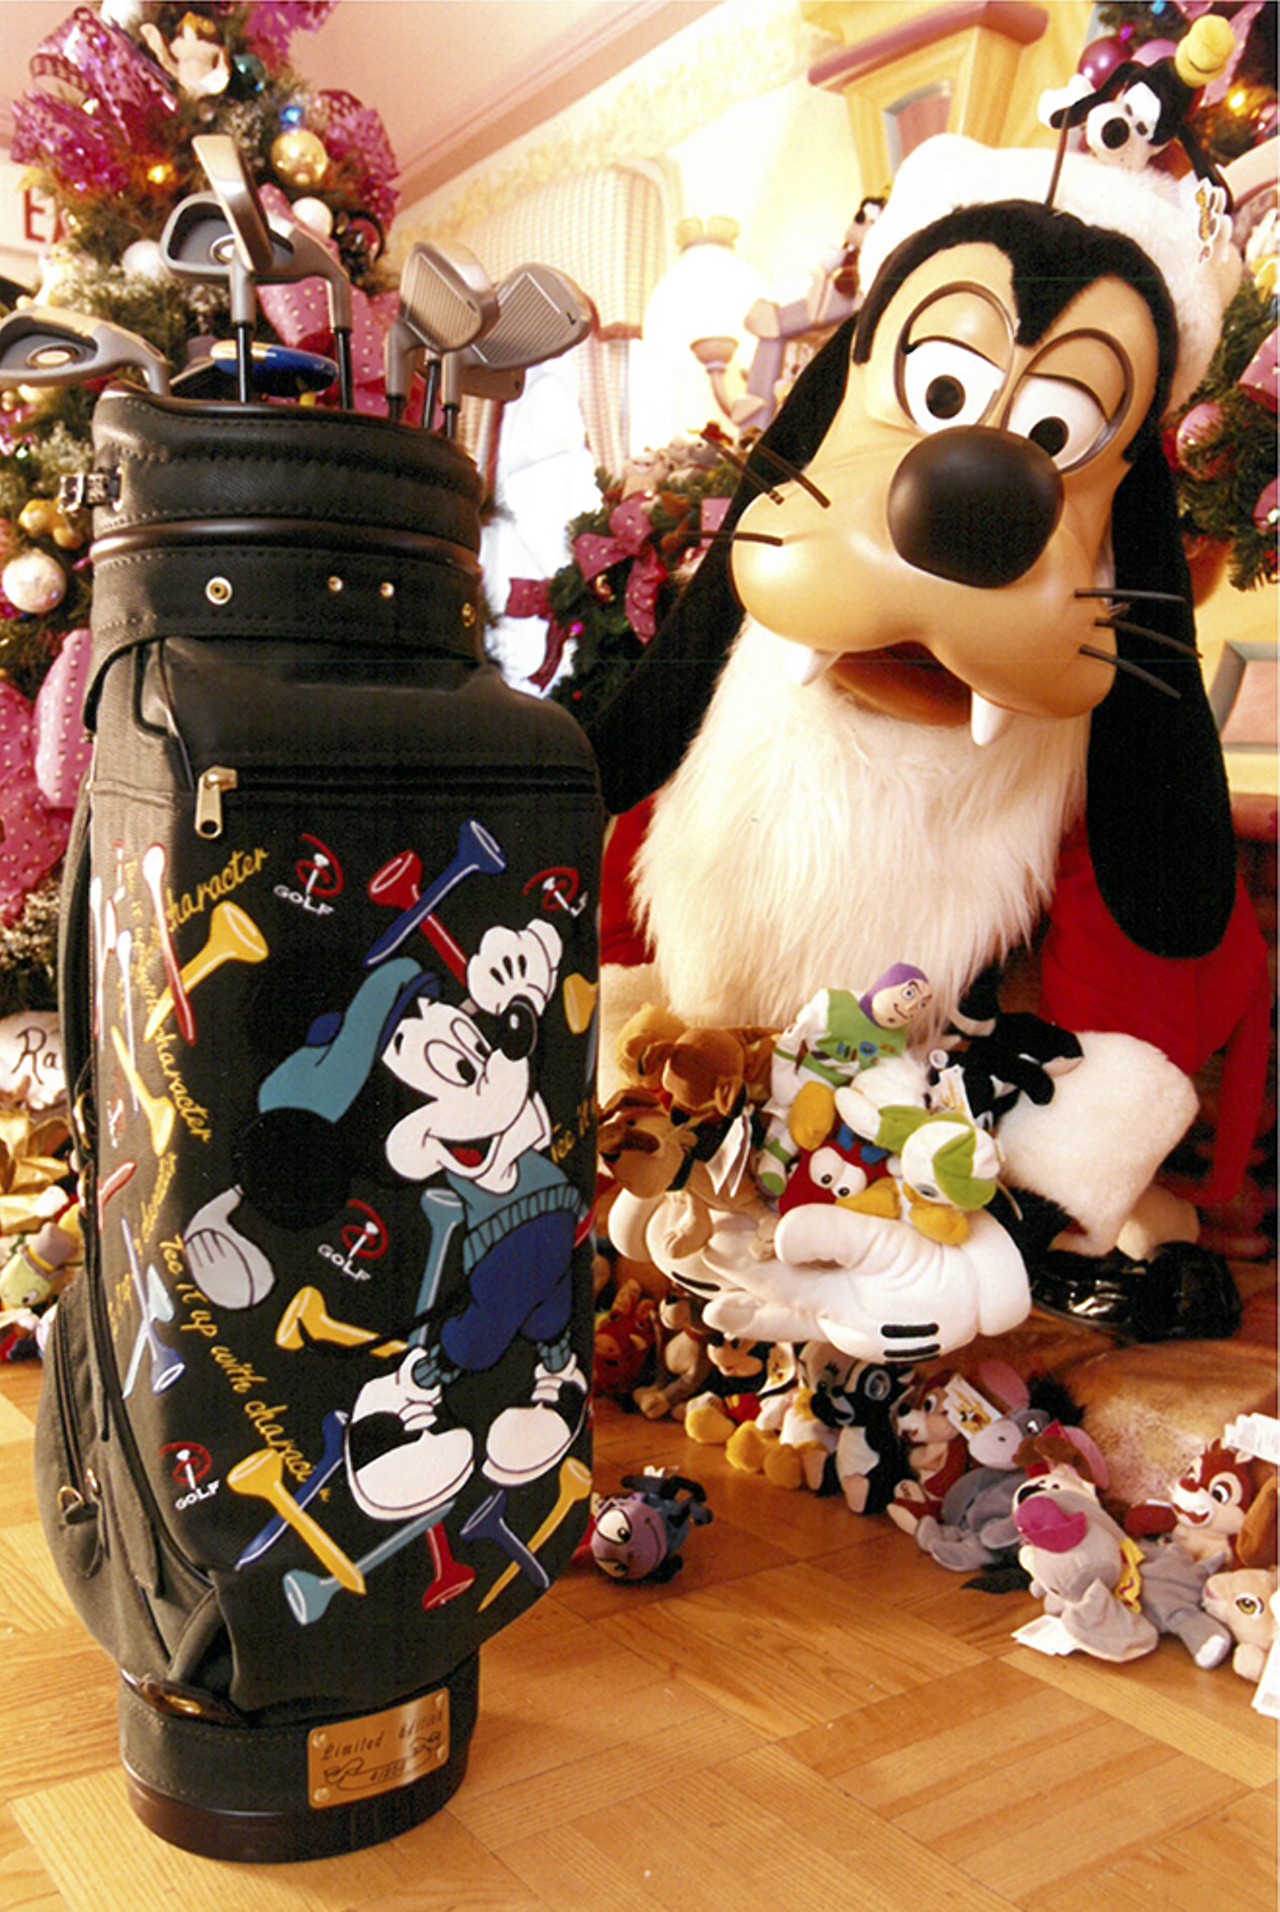 Goofy poses next to a bag of branded gifts, like this golf club set. 1998.